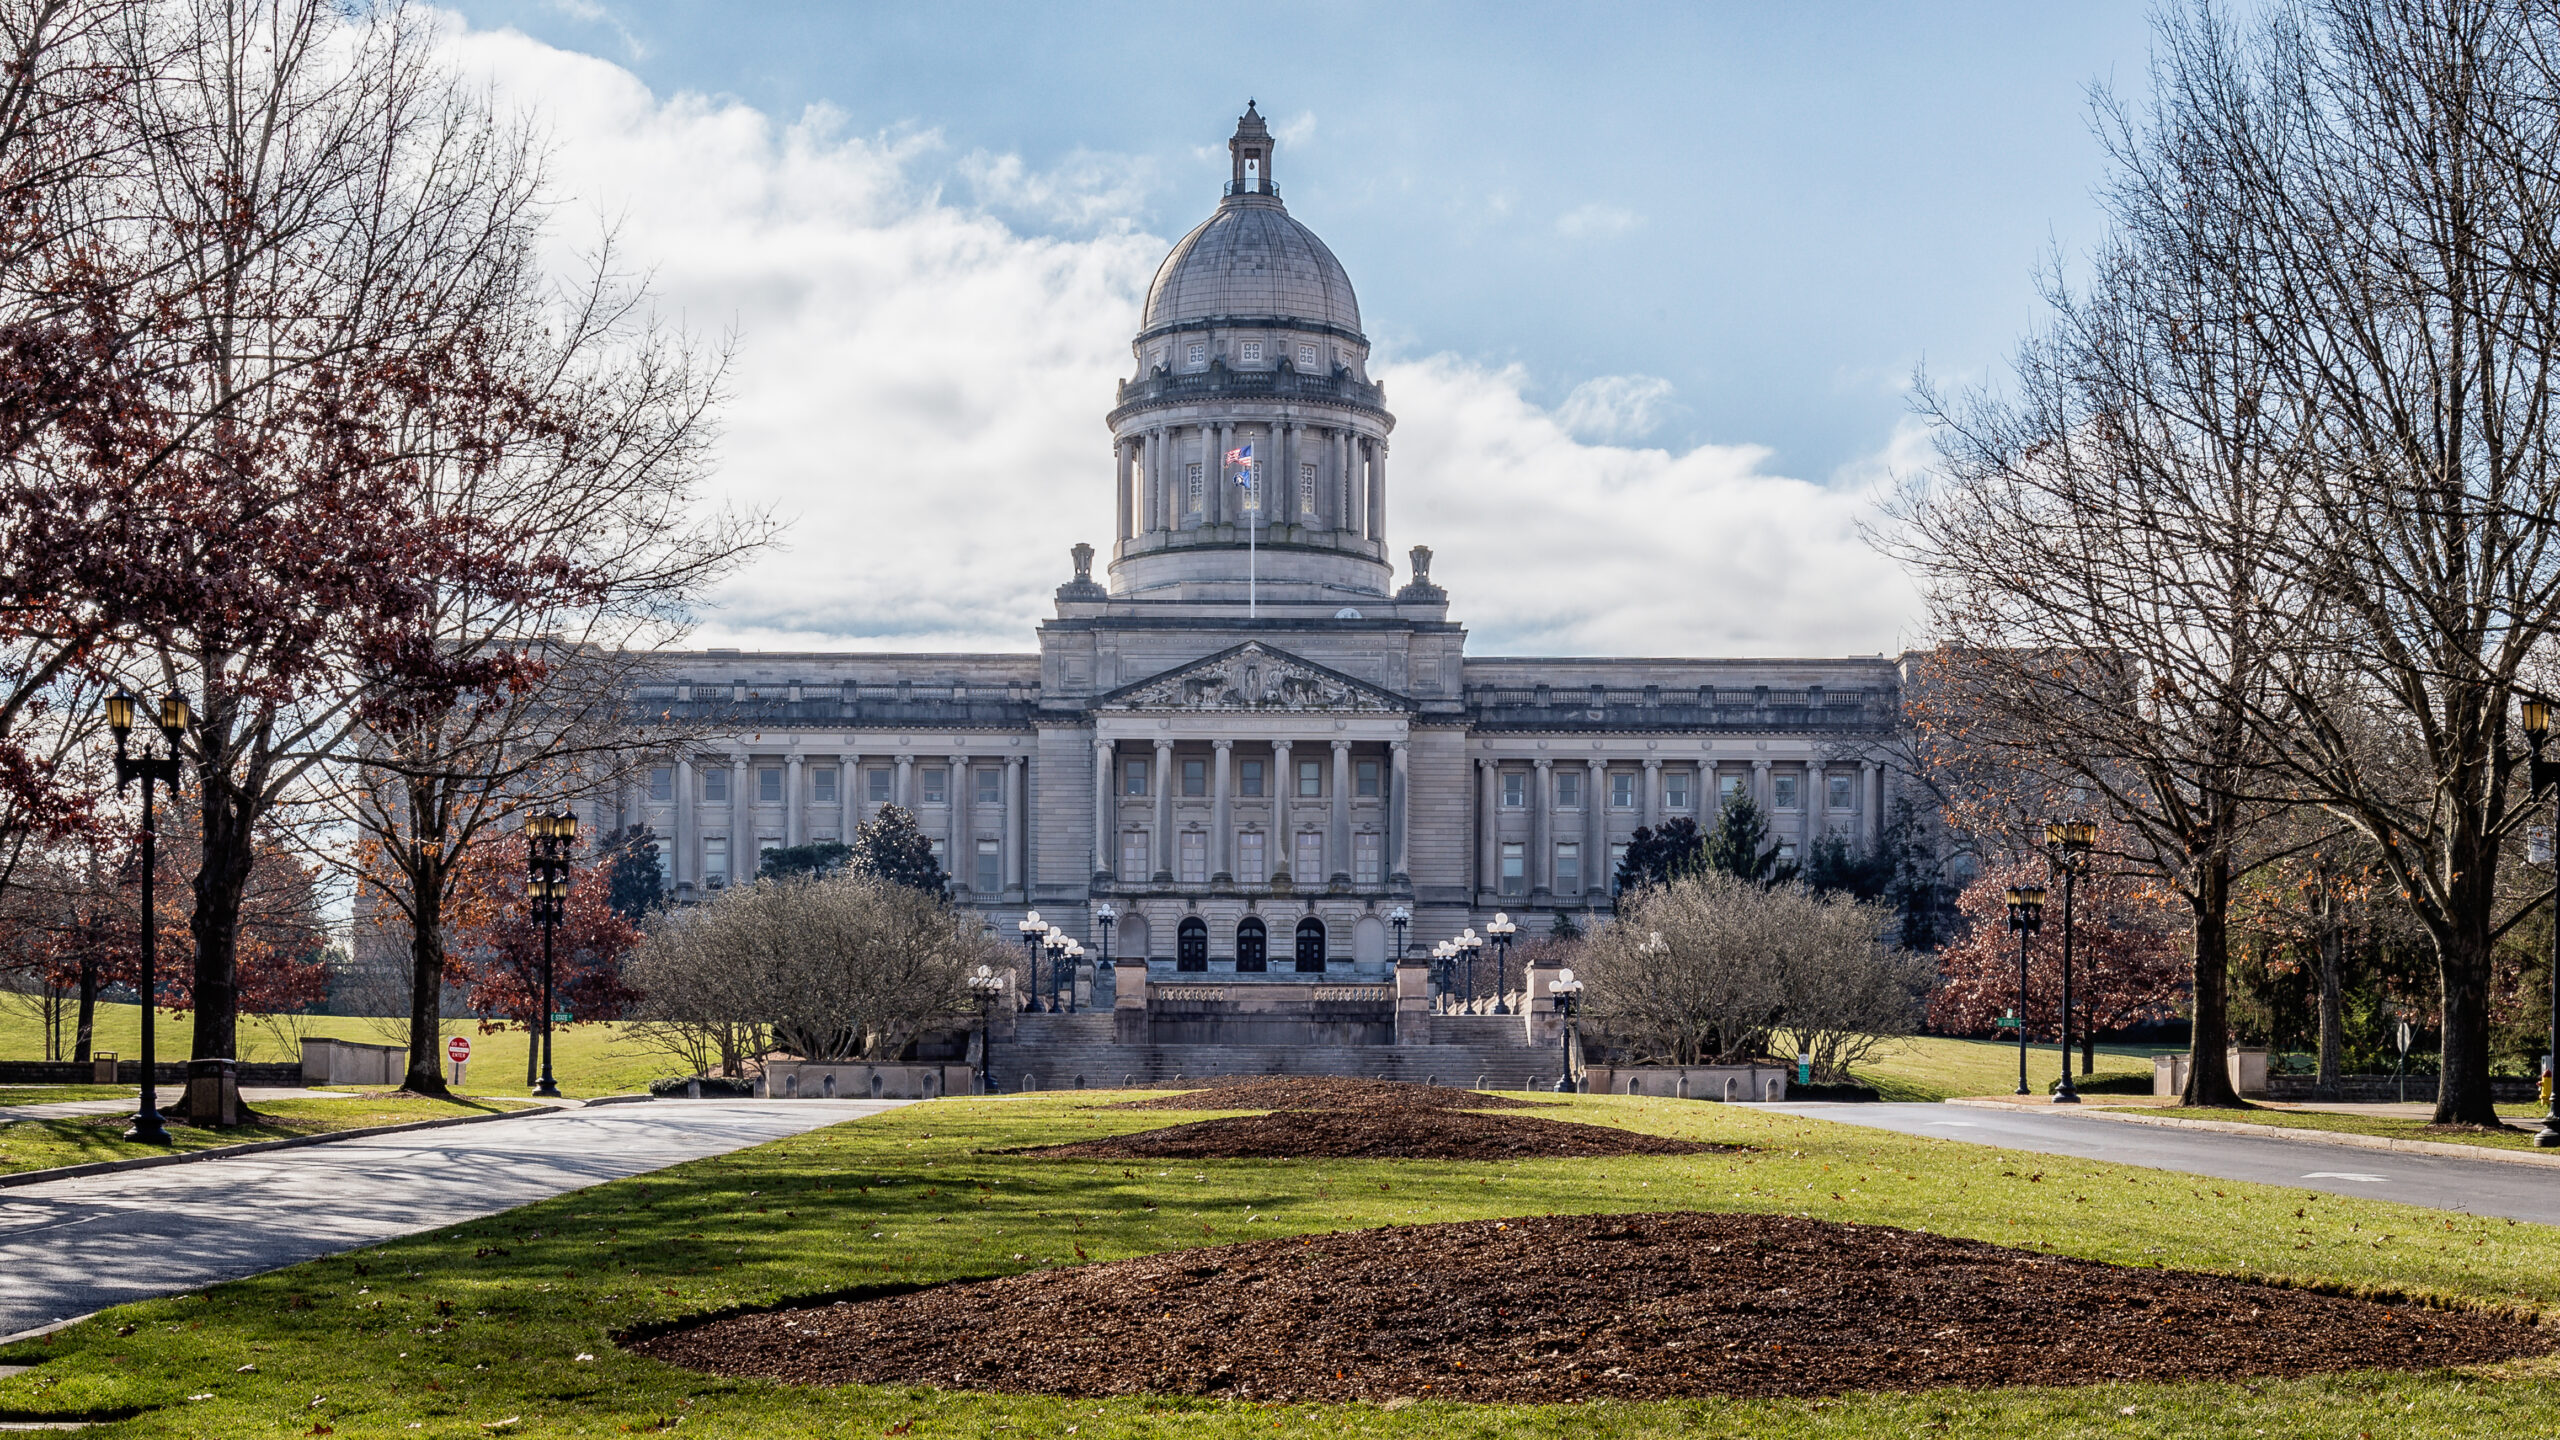 The Kentucky state capitol building in Frankfort, Kentucky.